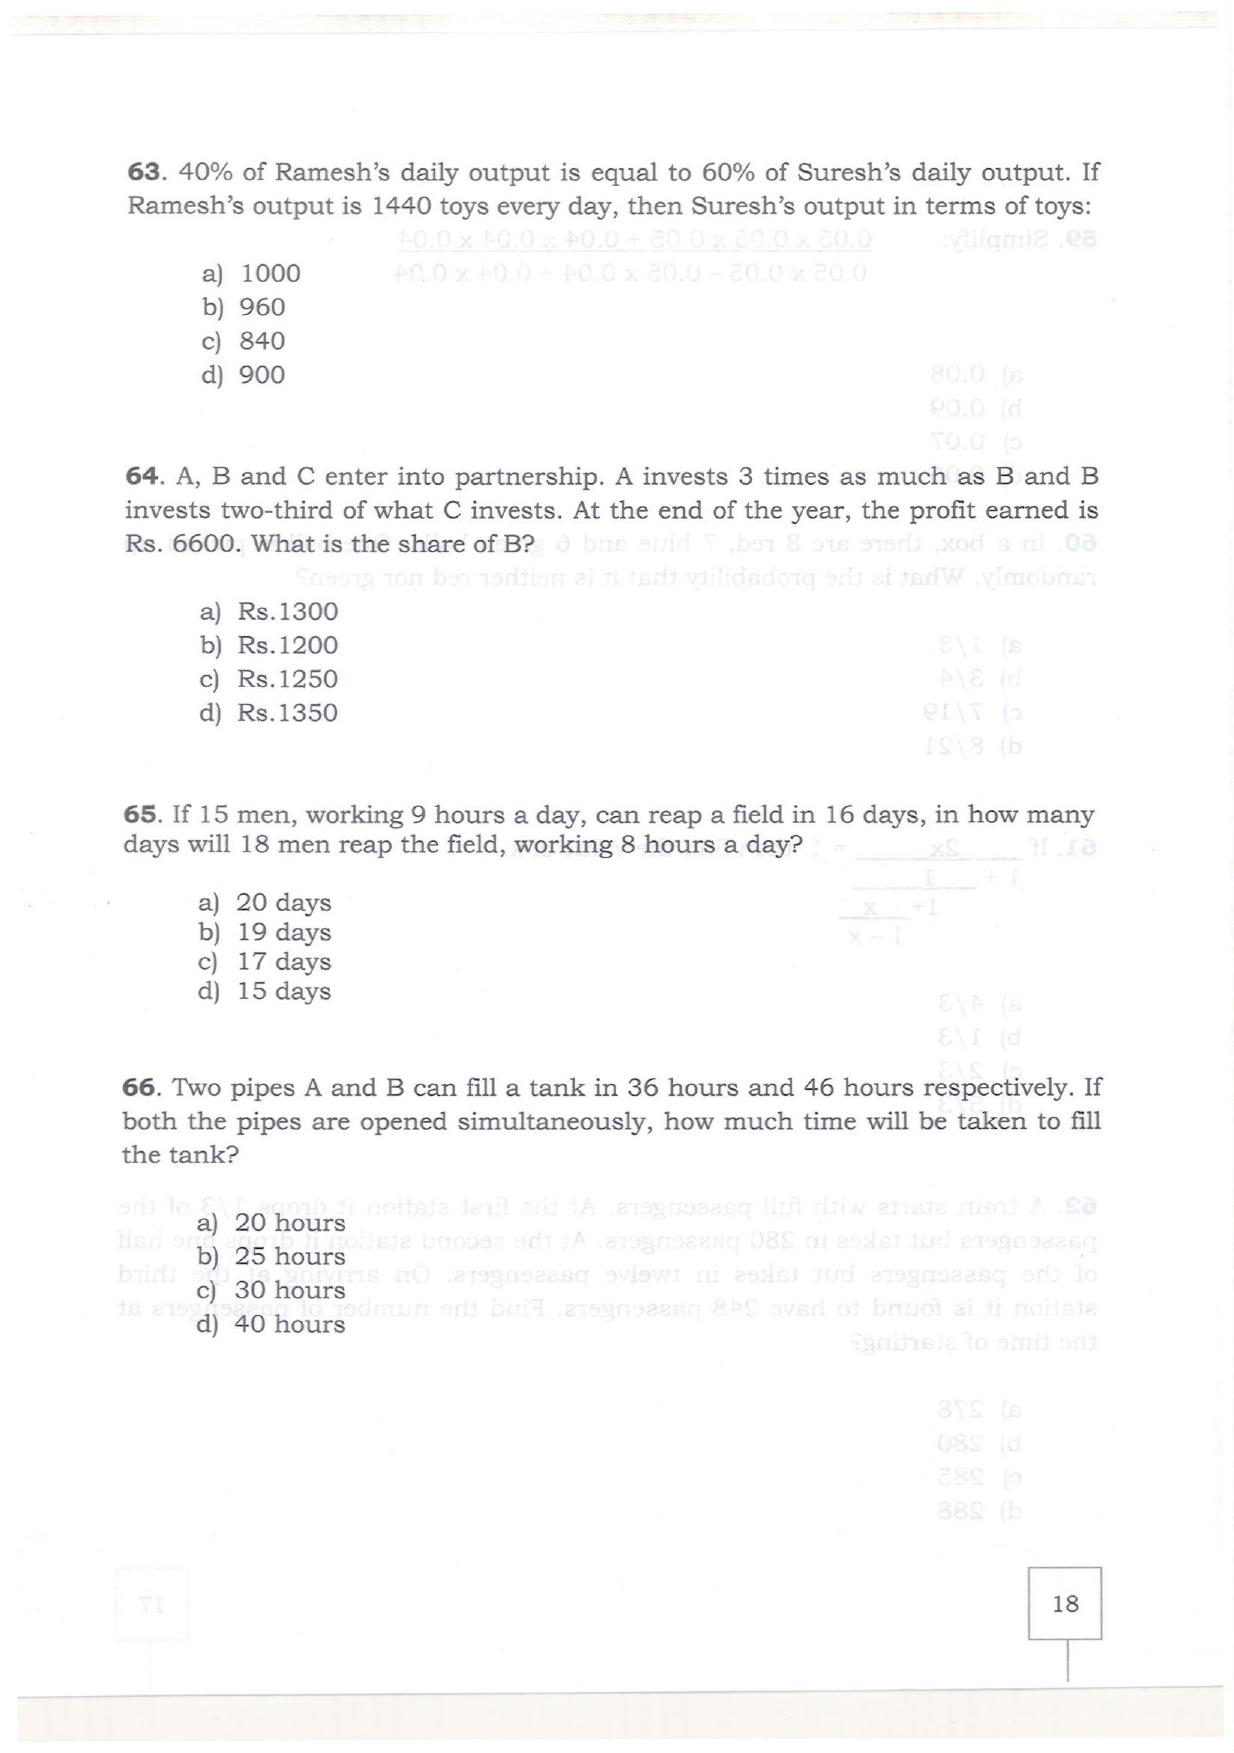 KMAT Question Papers - February 2019 - Page 16